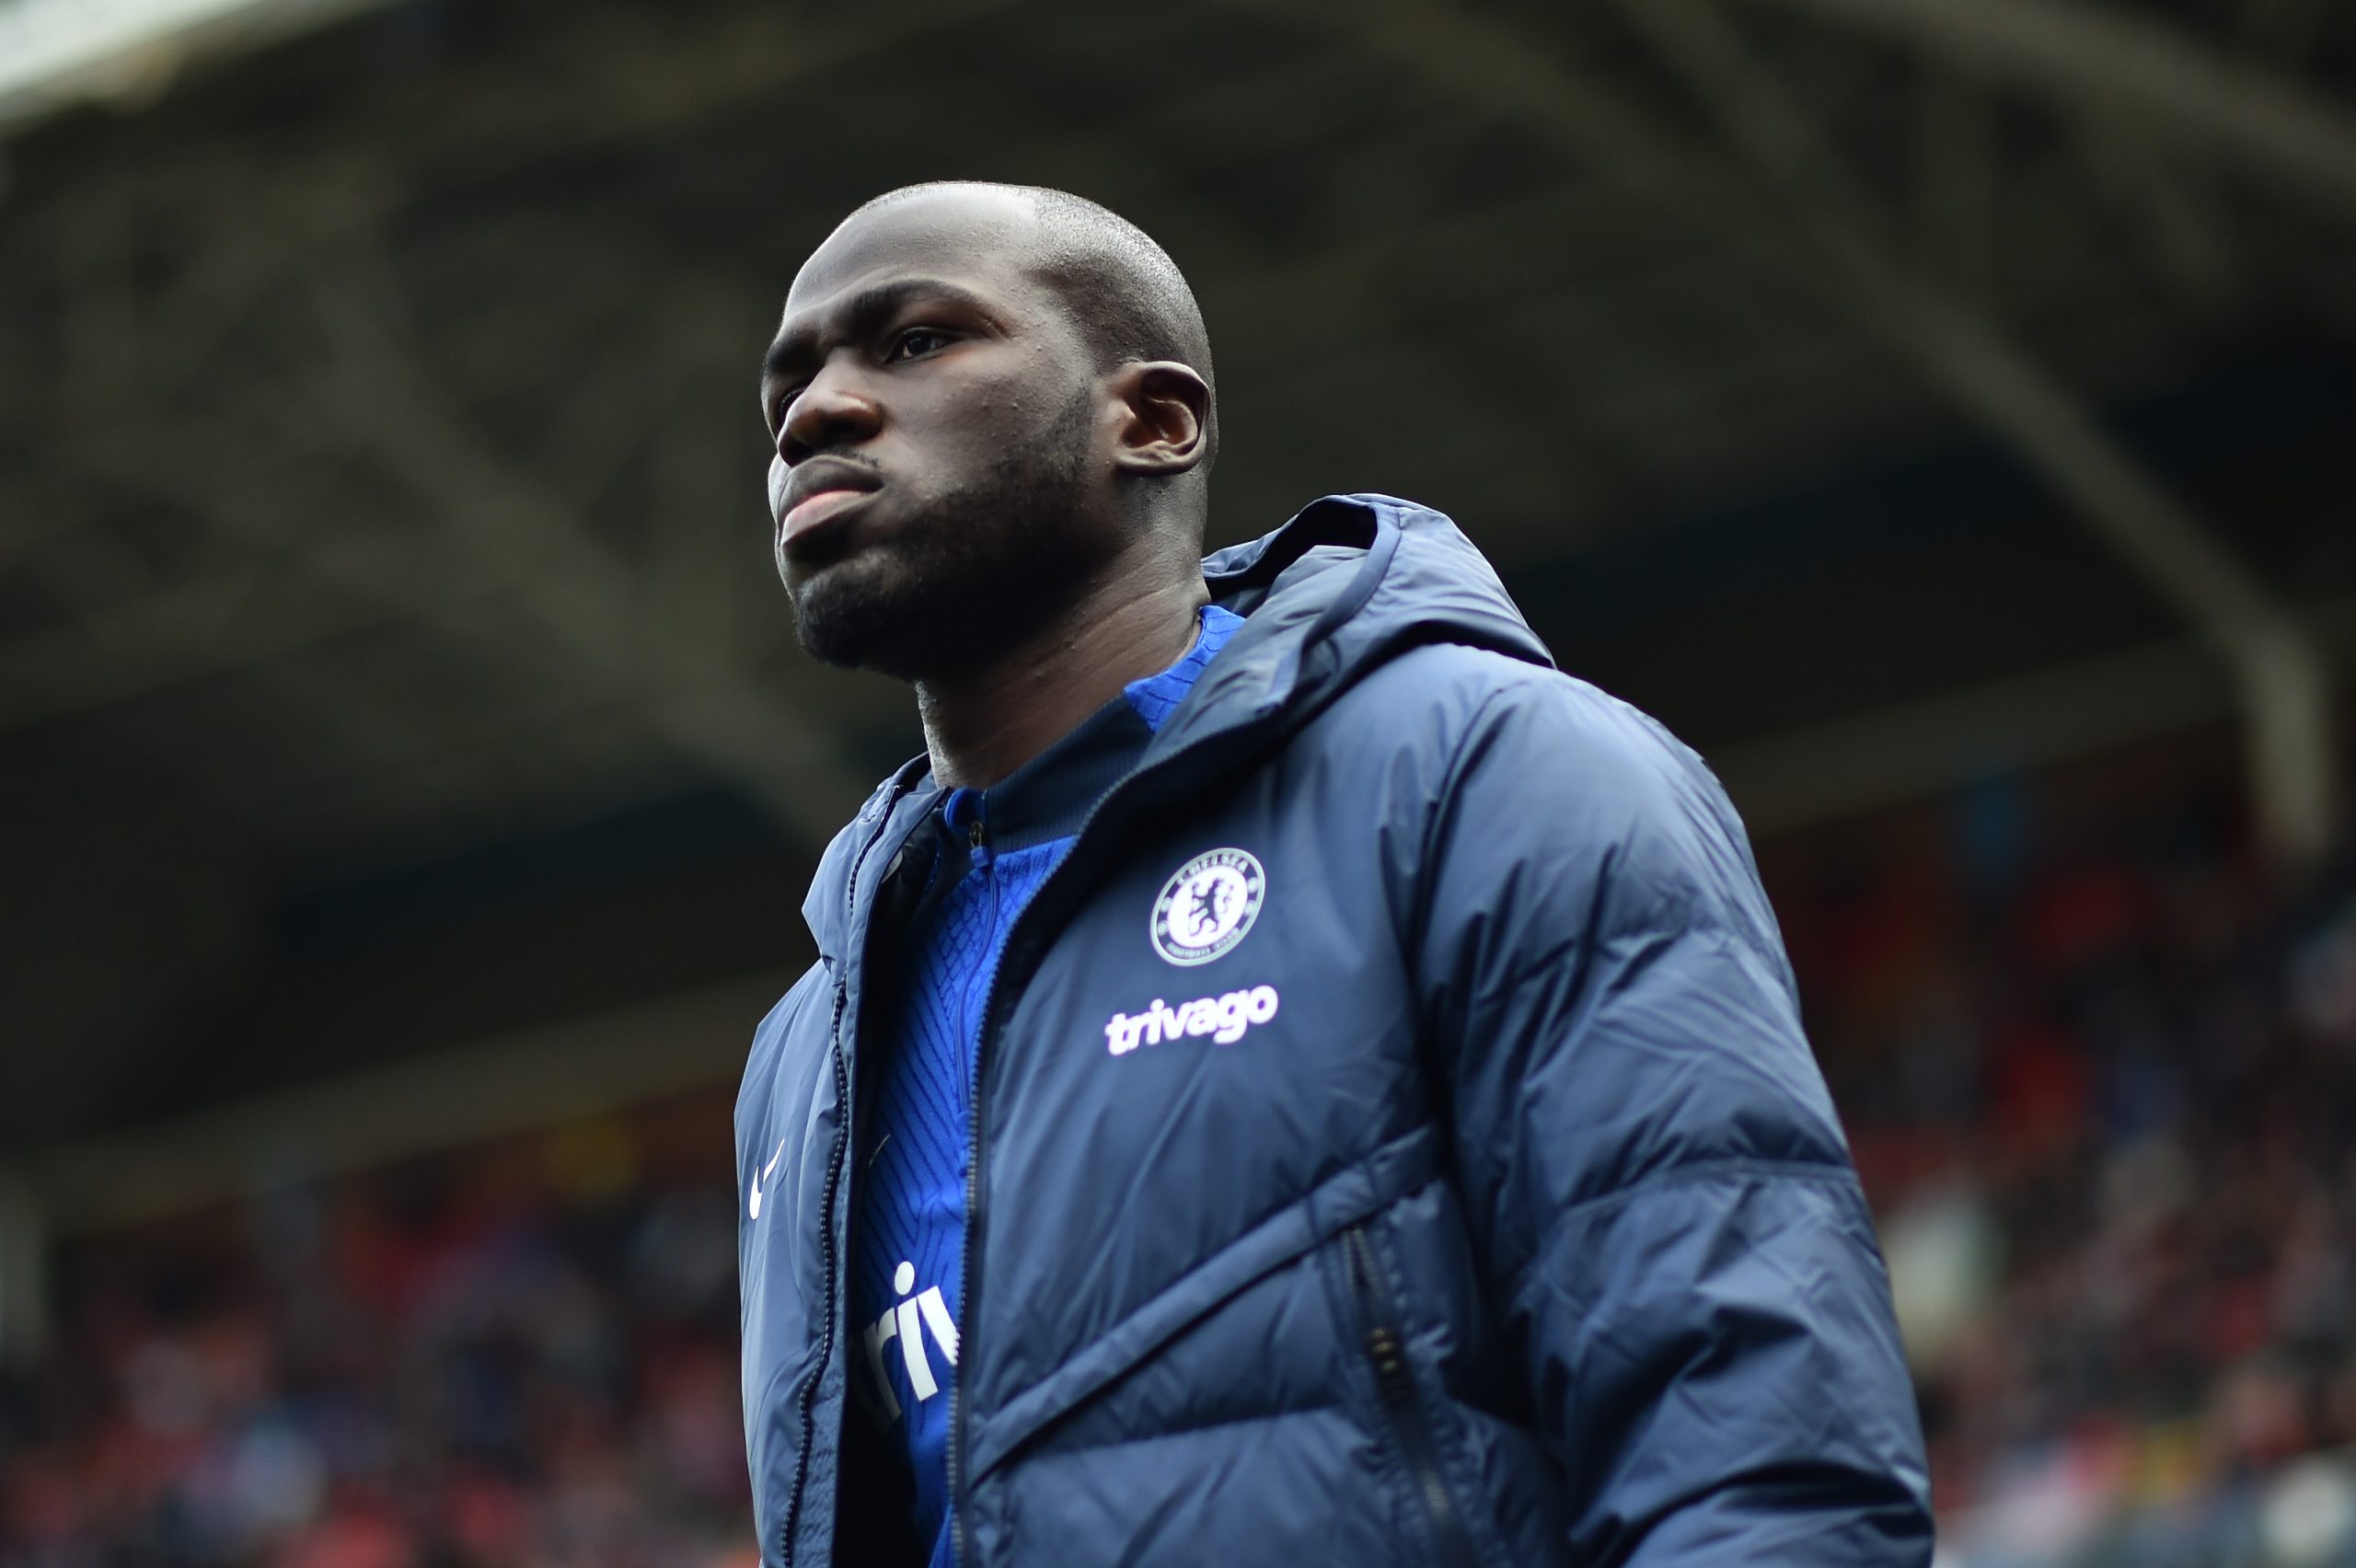 Kalidou Koulibaly of Chelsea walks out before the Premier League game against Crystal Palace.